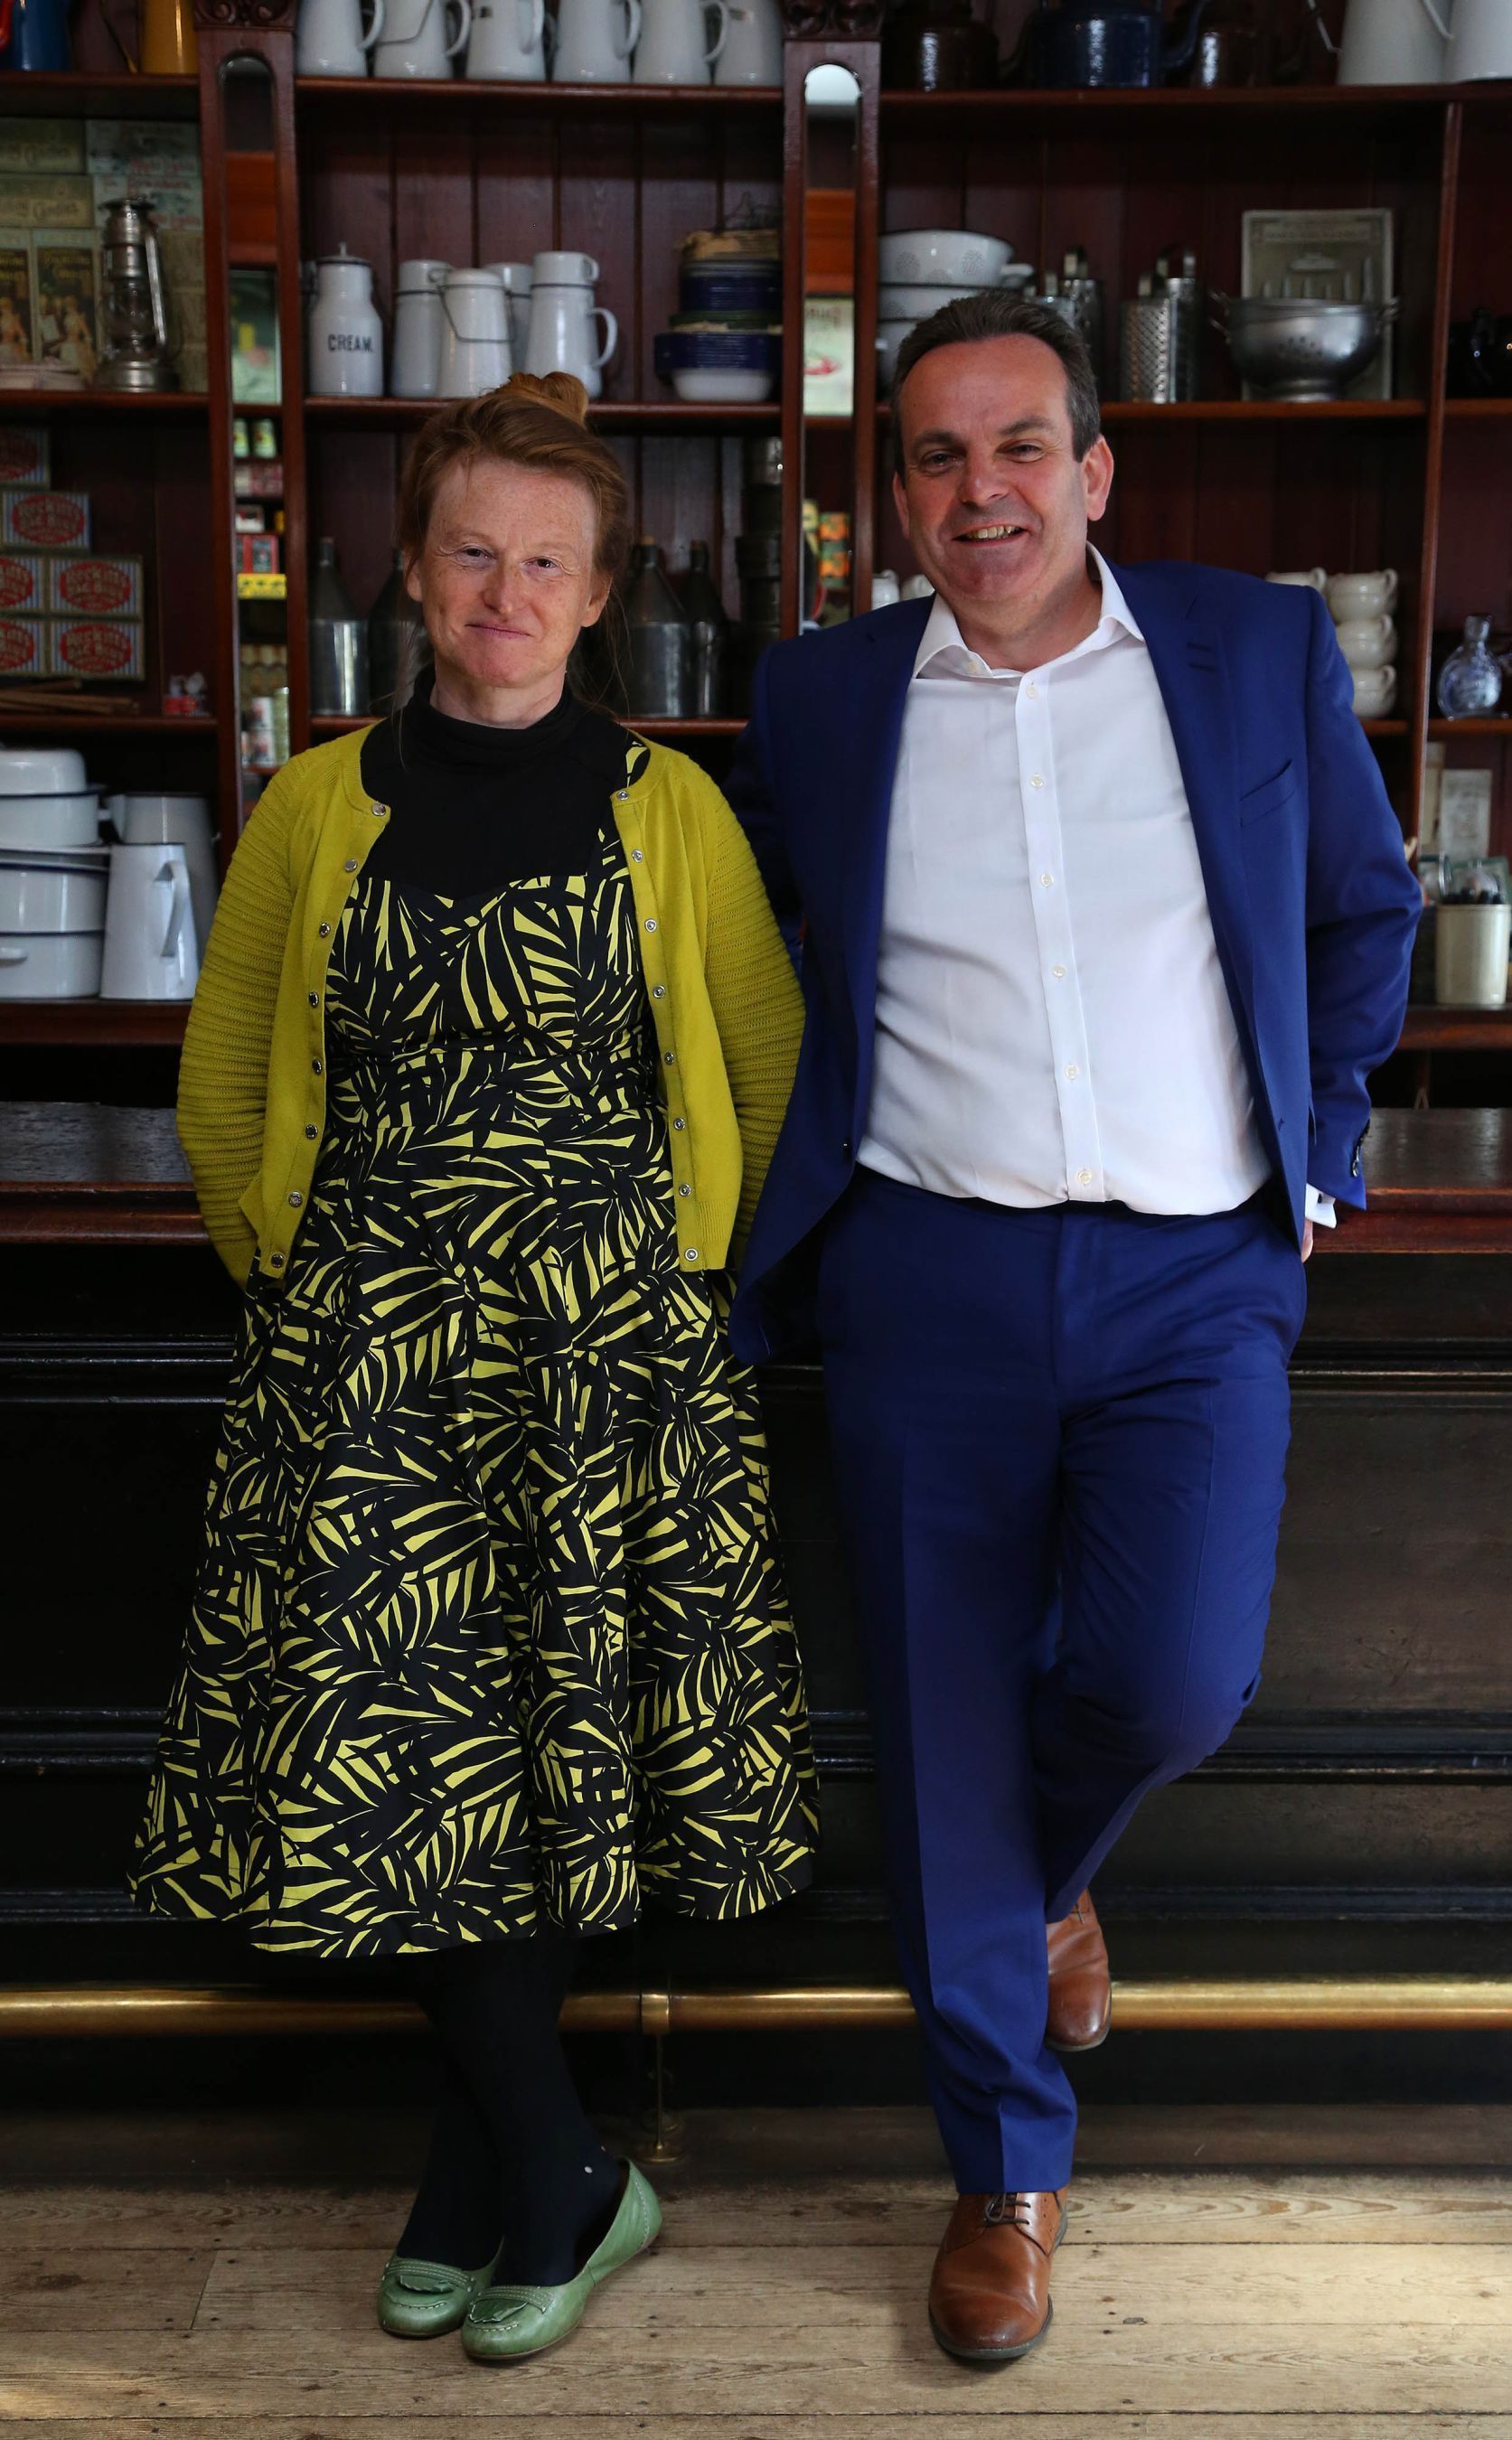 Left to right - Ruth Goodman Independent expert and social historian Ian Cracknell CEO of UIA (PRNewsFoto/UIA Insurance)